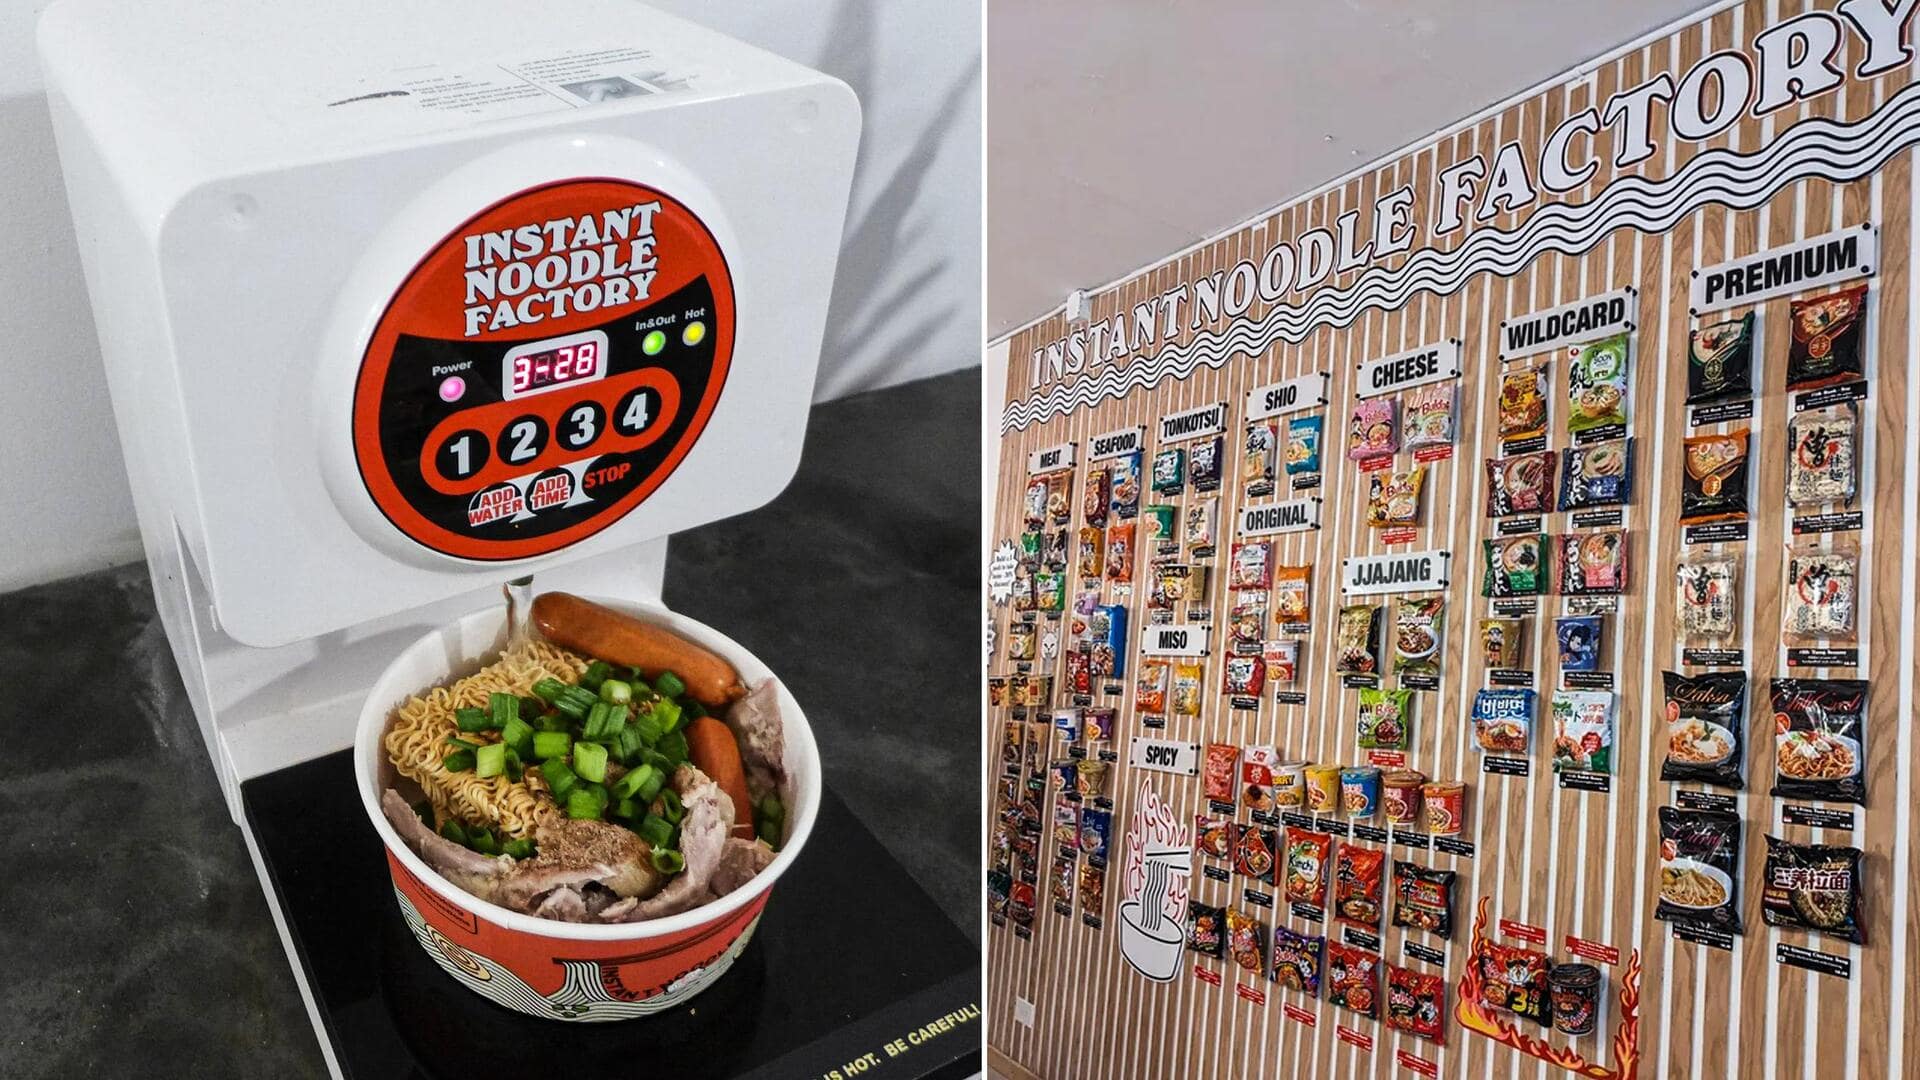 NYC: Restaurant serves instant ramen that you cook yourself